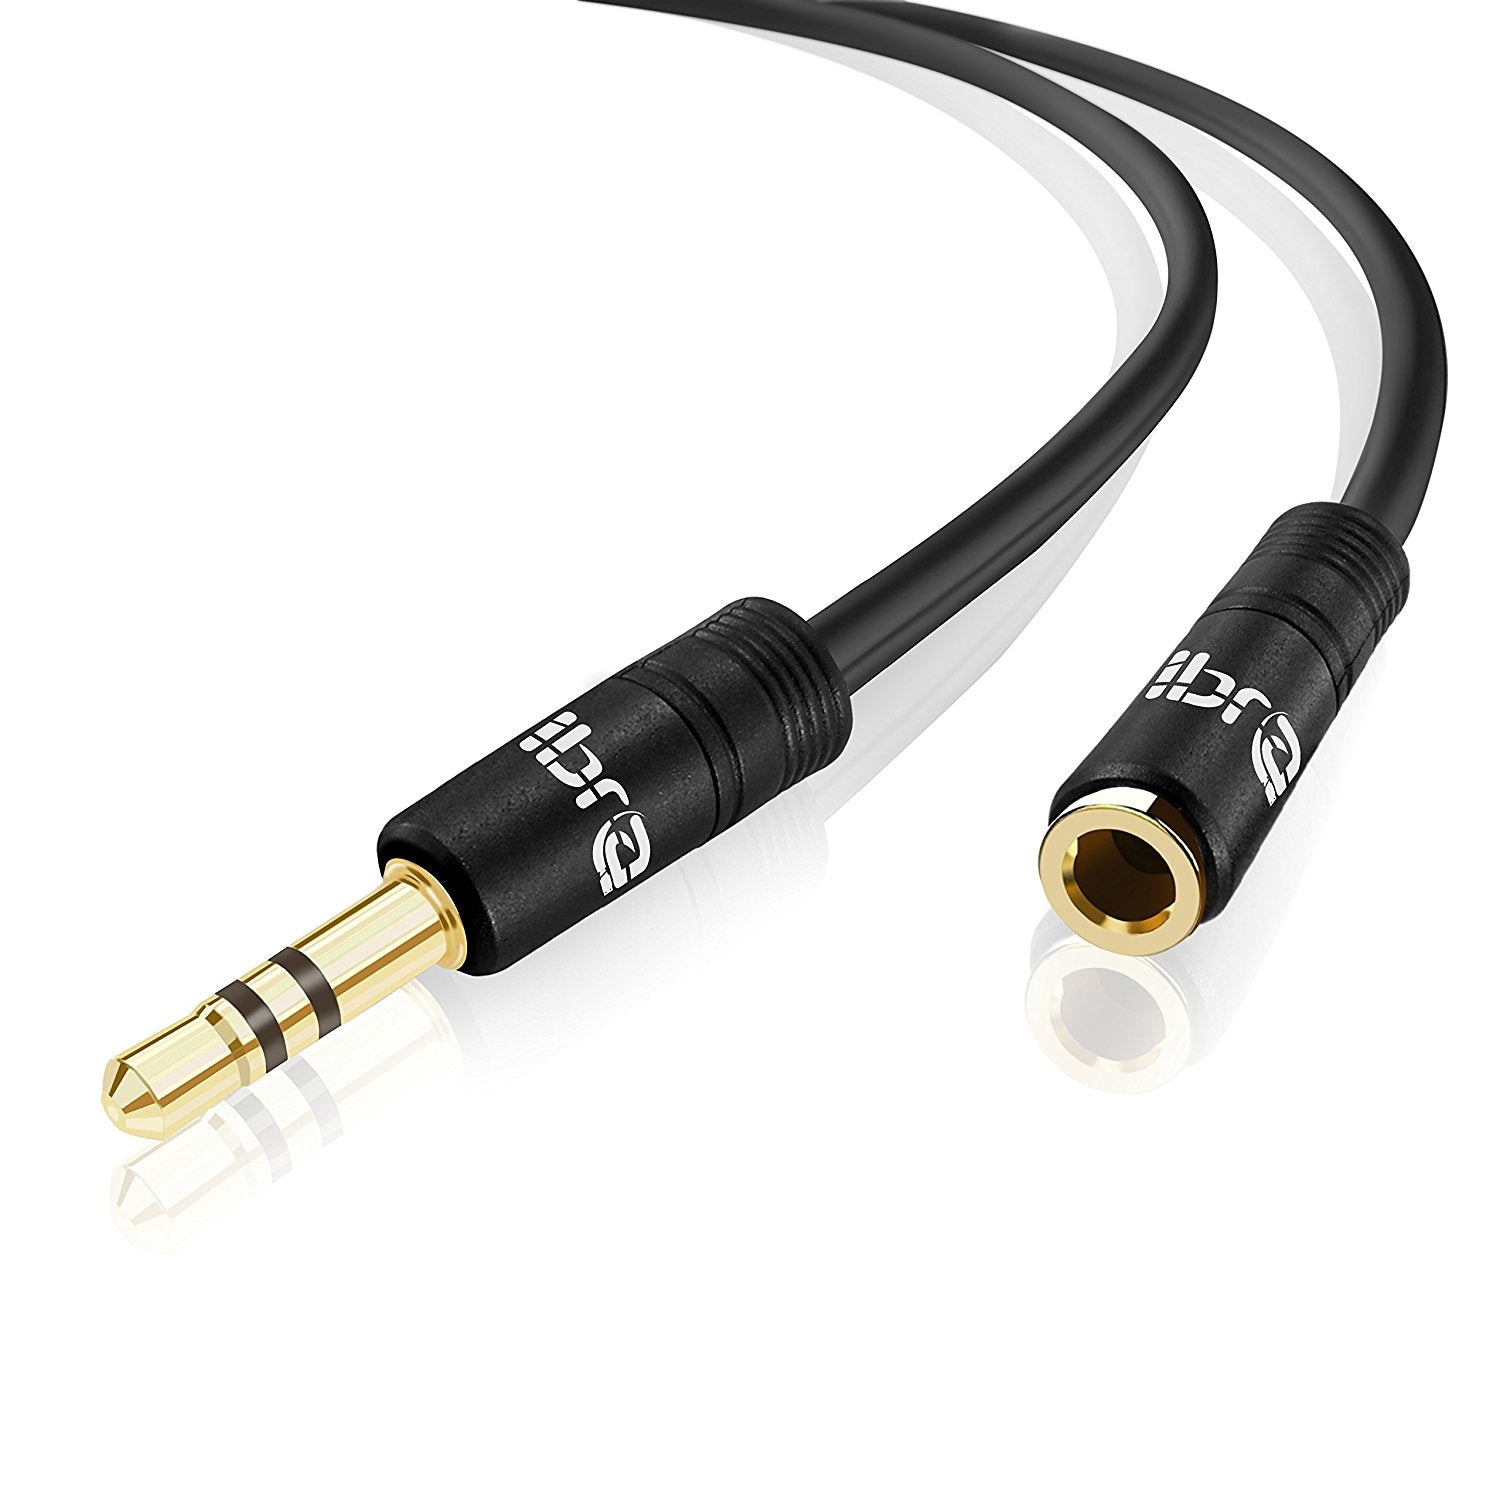 IBRA 5M Stereo Jack Extension Cable 3.5mm Male > 3.5mm Female - Black